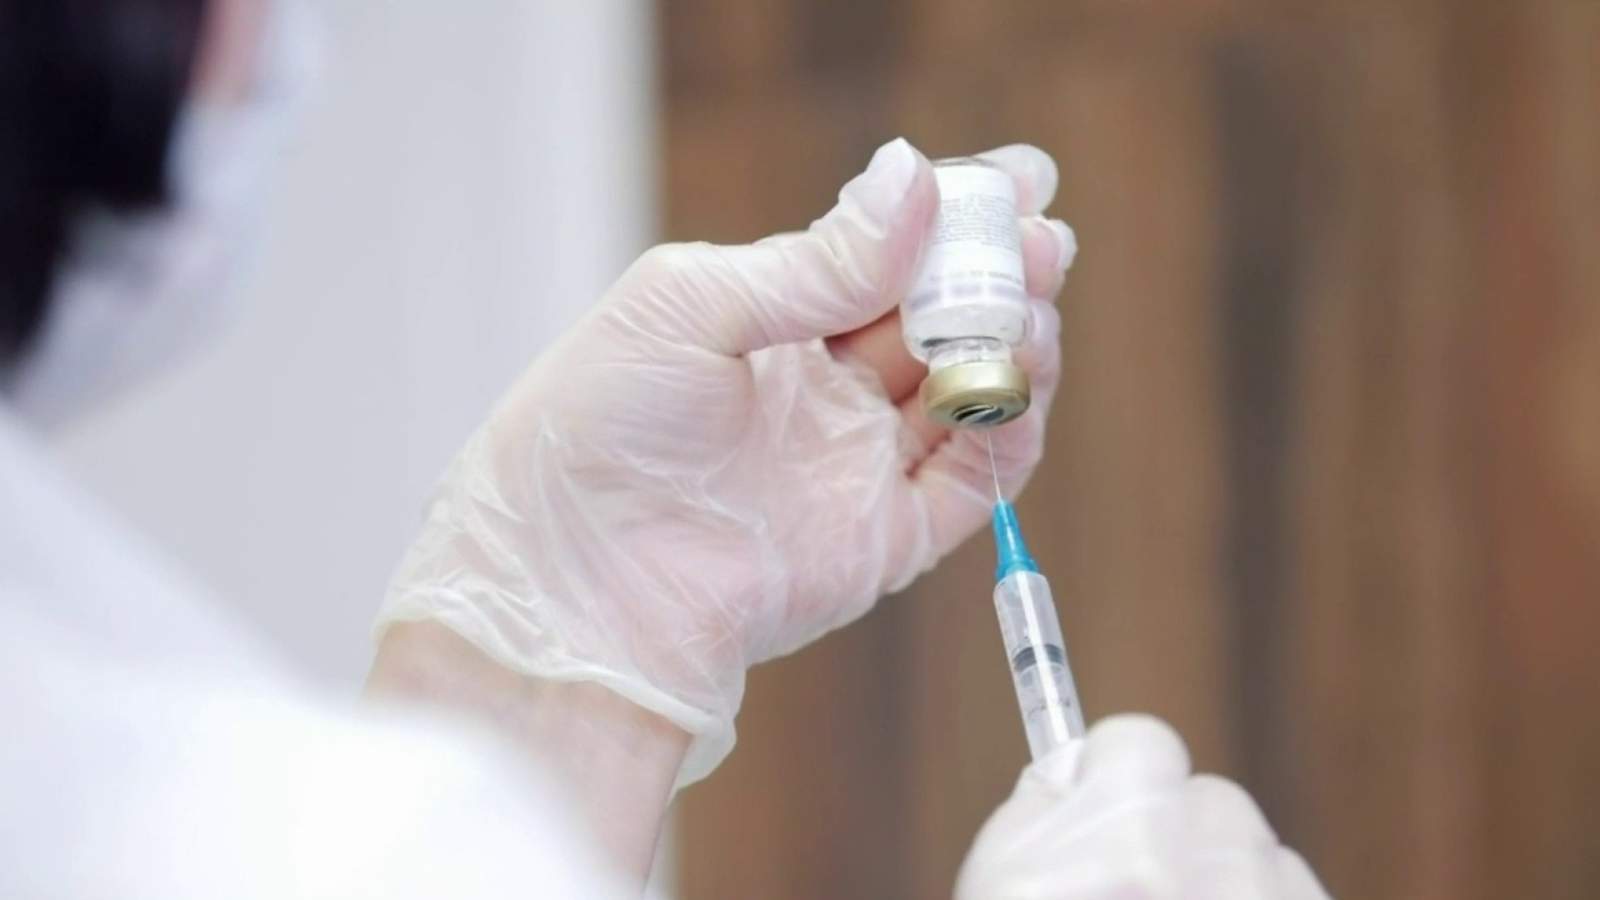 Clay County to offer pop-up COVID-19 vaccination clinics, starting Monday